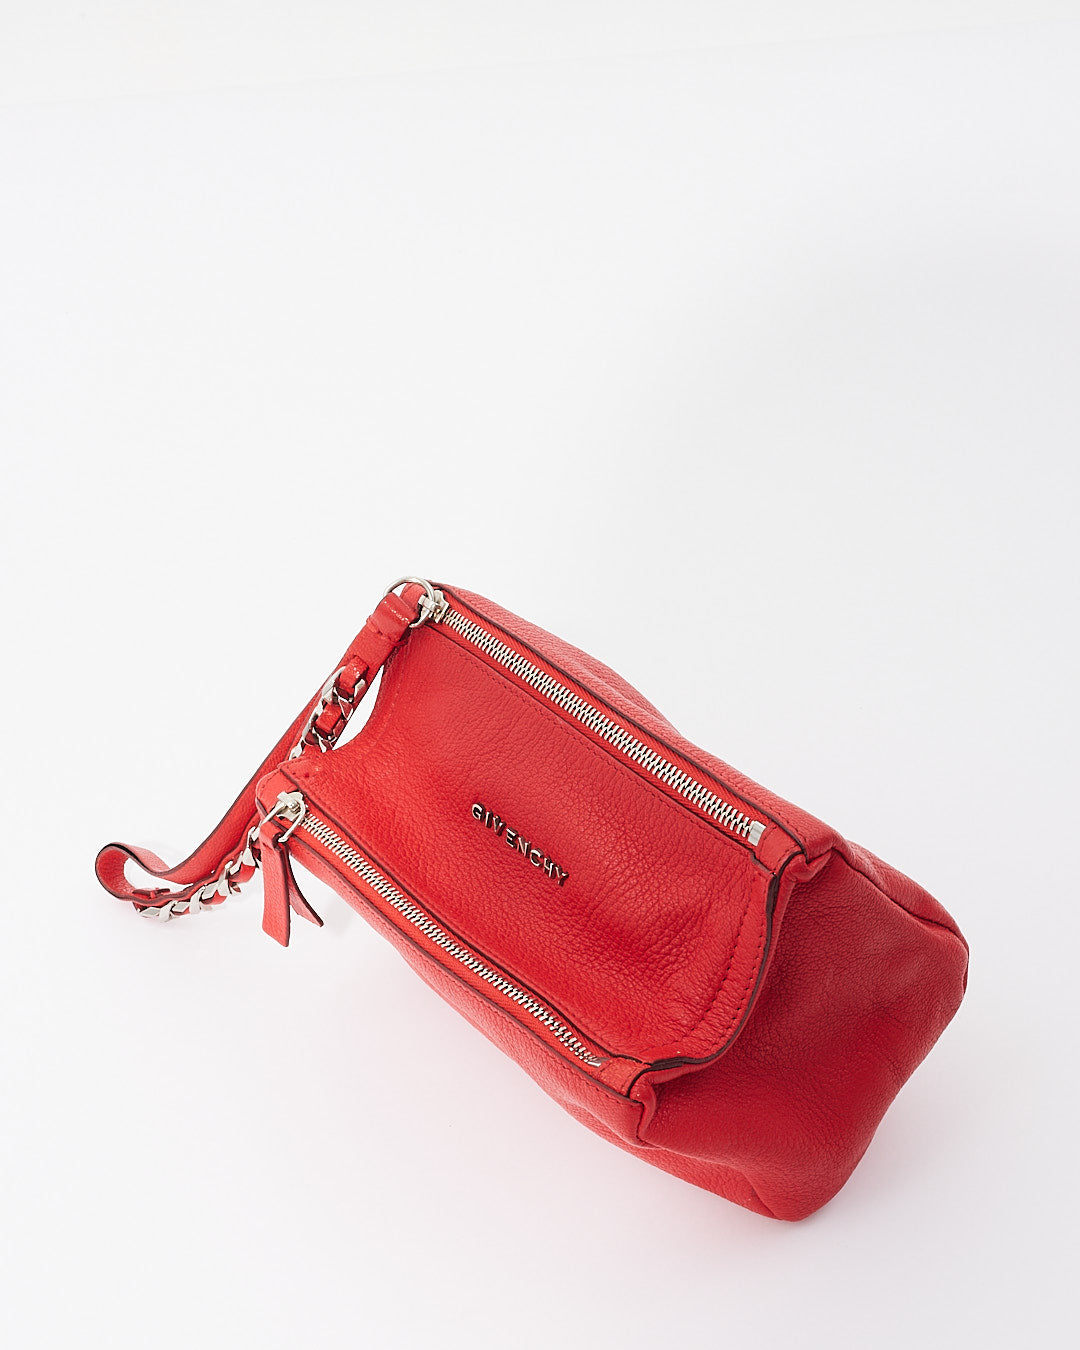 Givenchy Red Leather Pandora Wristlet Clutch